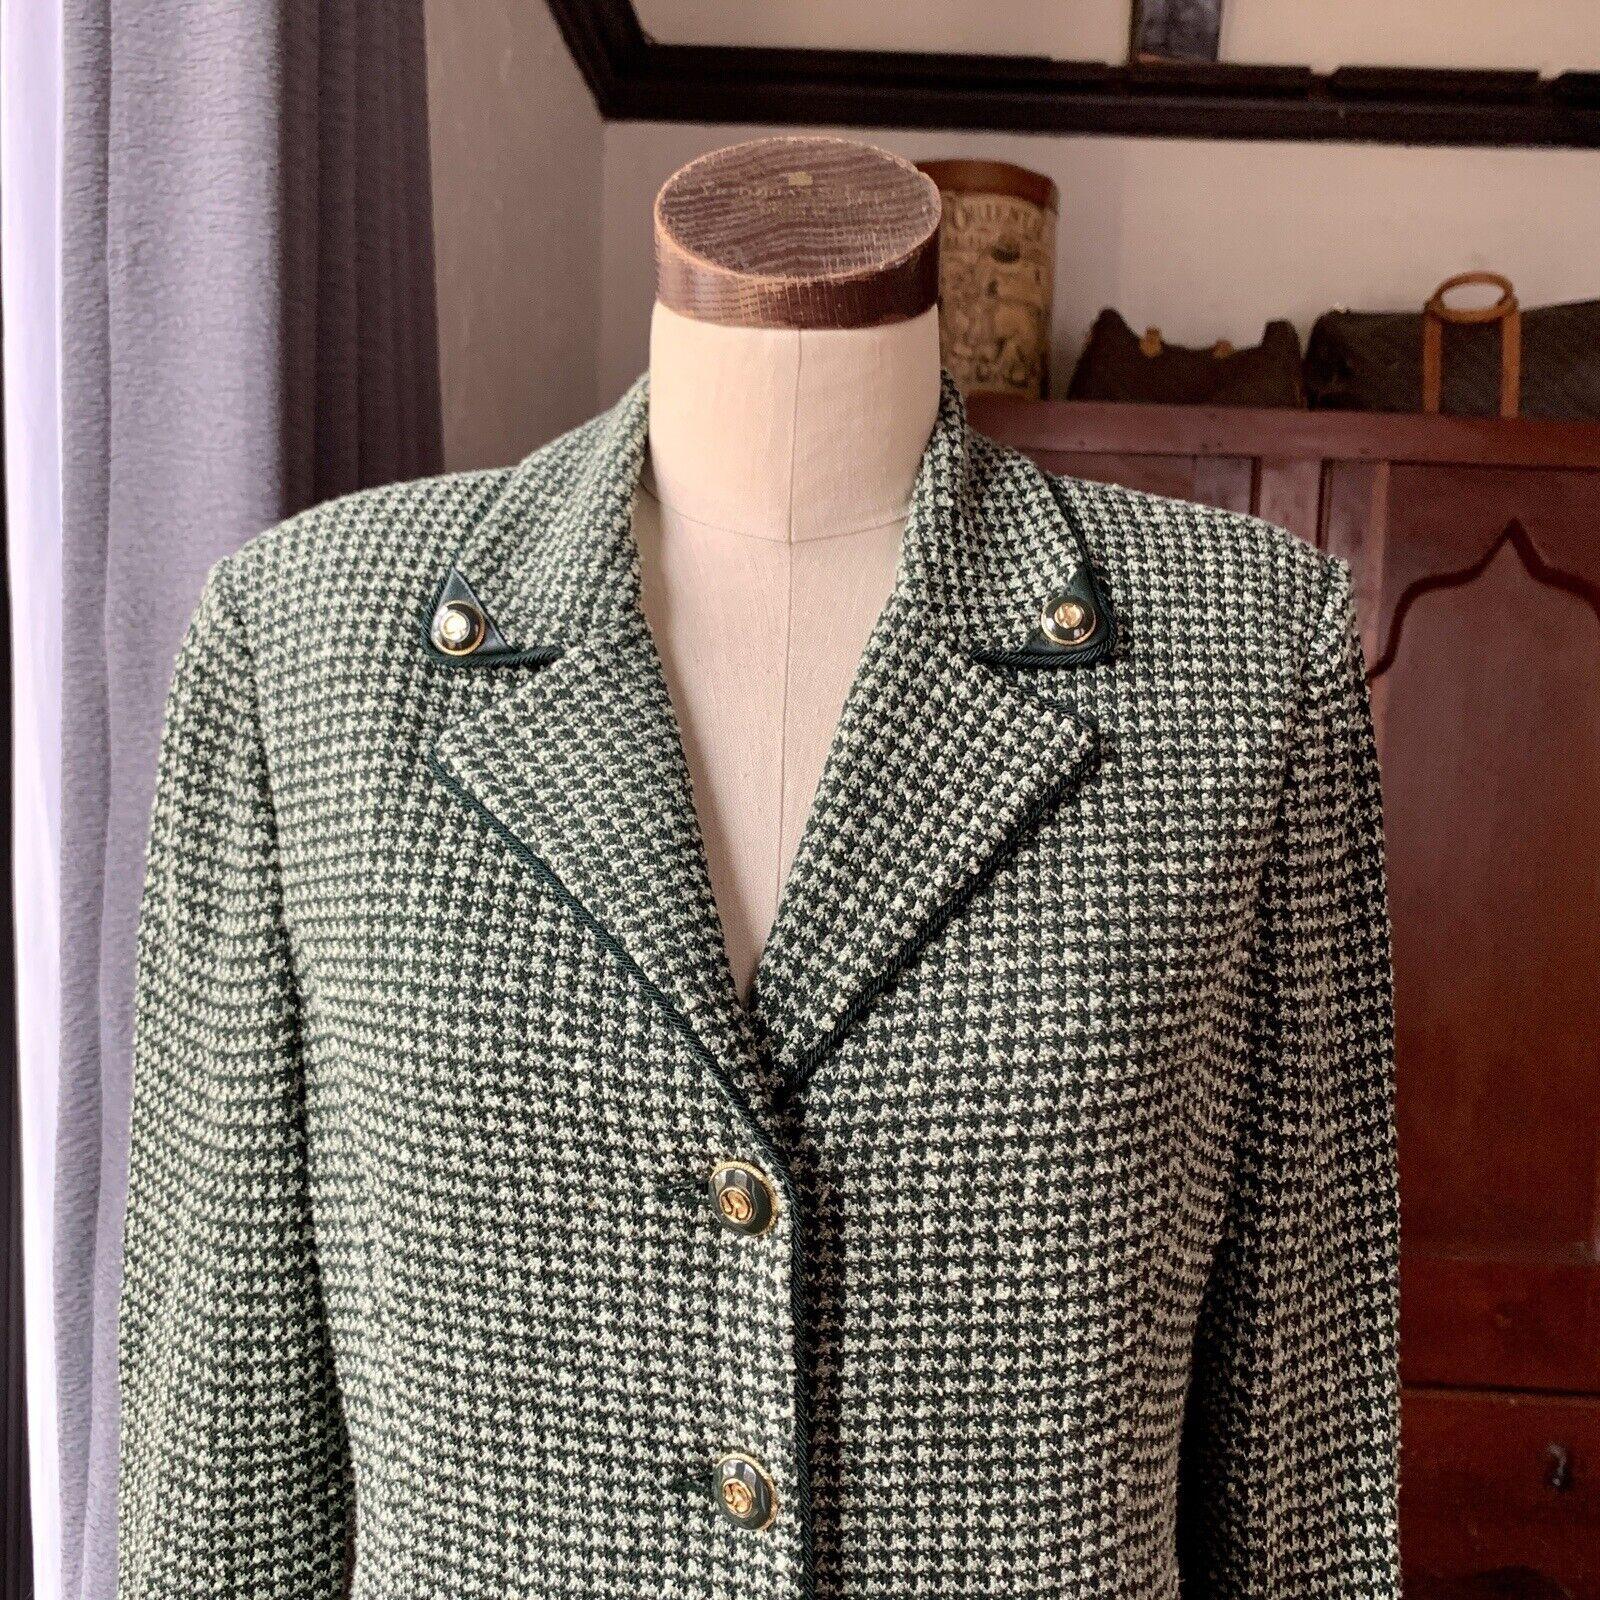 Vintage ST. JOHN COLLECTION Knit TWEED Jacket VEGAN LEATHER Green 8 In Good Condition For Sale In Asheville, NC